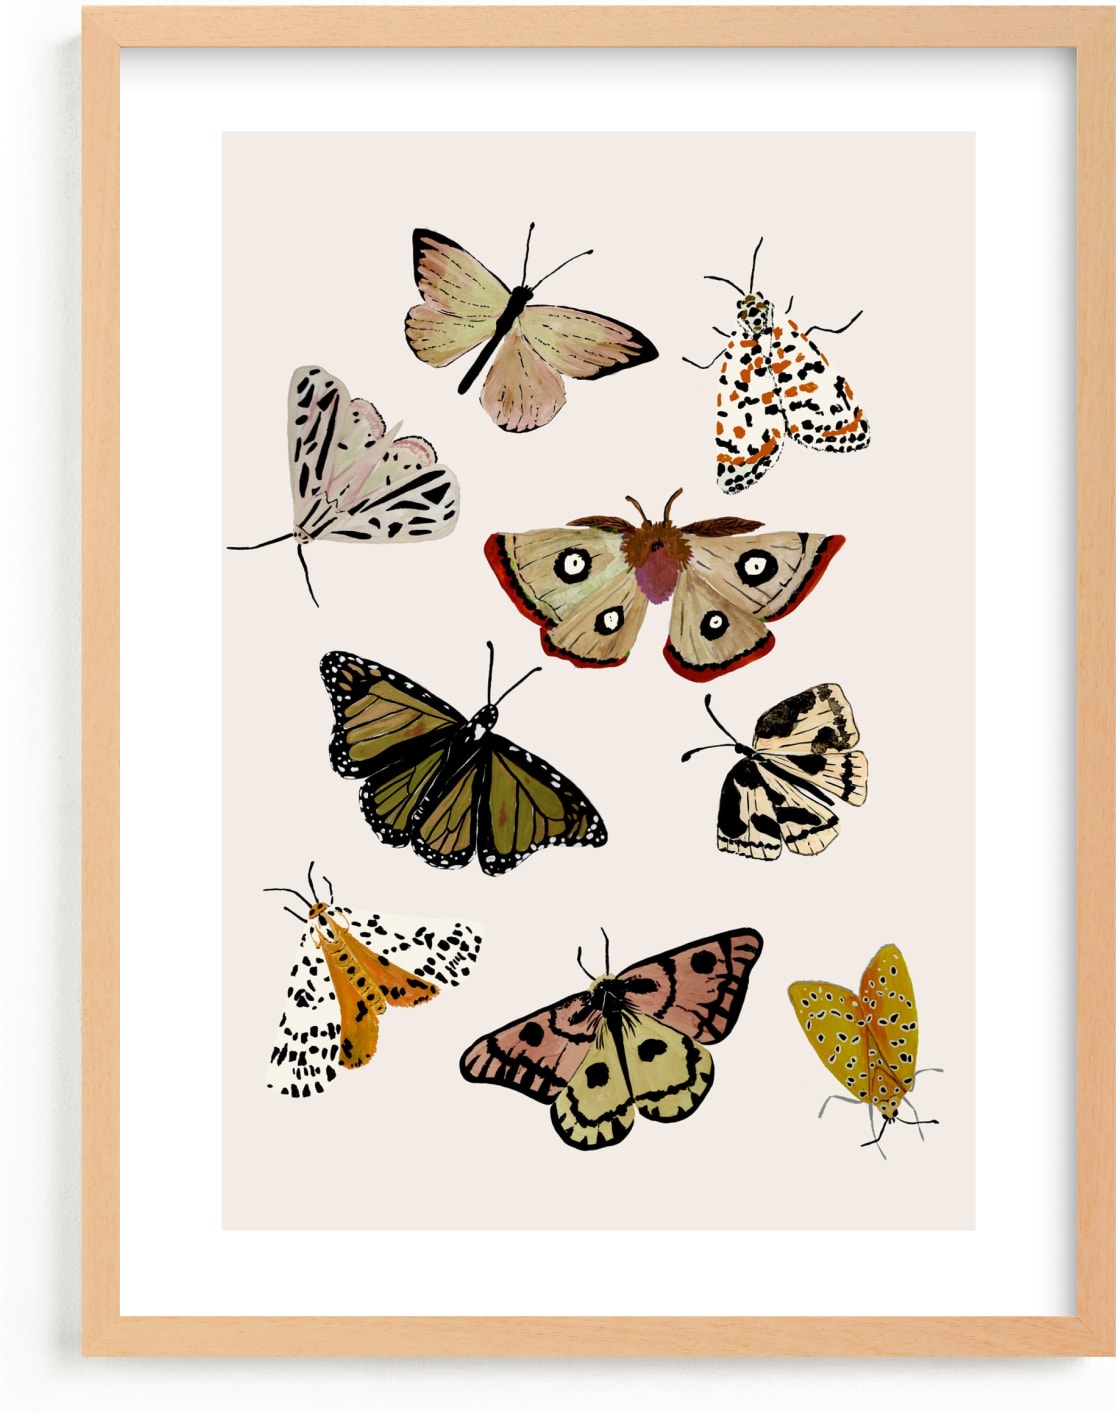 This is a colorful nursery wall art by Shannon Kirsten called Moths & Butterflies.